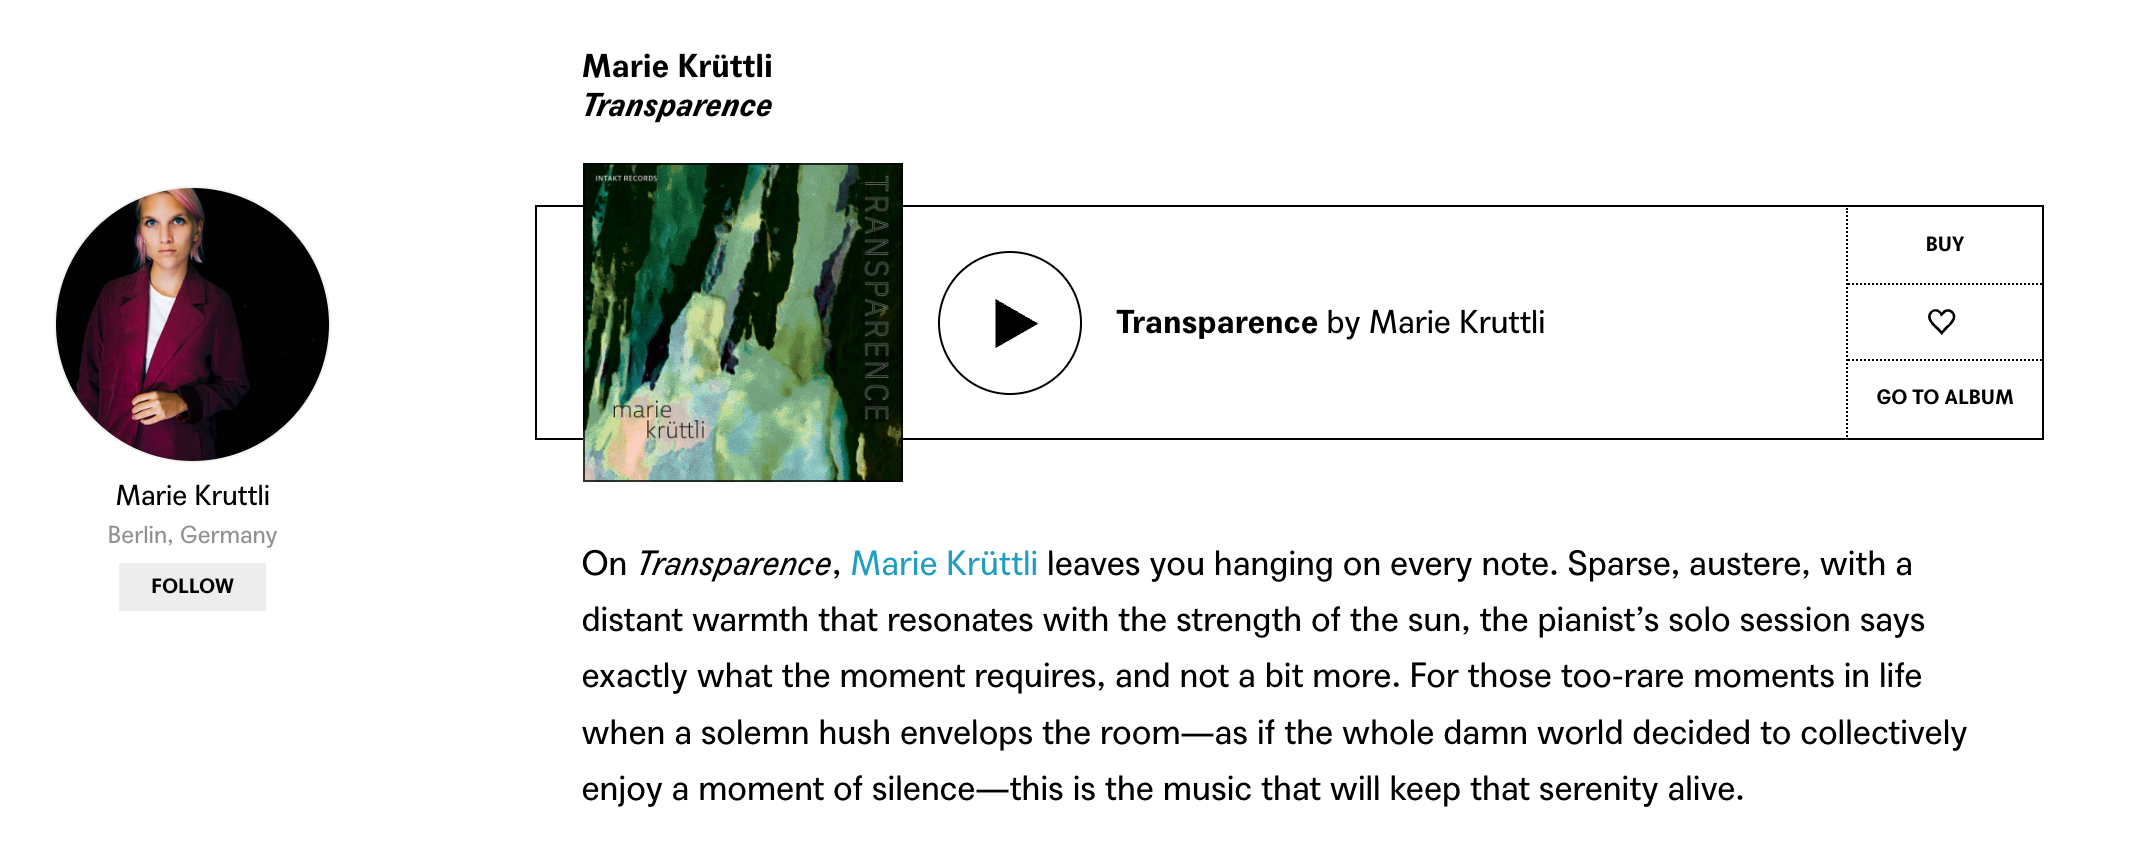 On Transparence, Marie Krüttli leaves you hanging on every note. Sparse, austere, with a distant warmth that resonates with the strength of the sun, the pianist’s solo session says exactly what the moment requires, and not a bit more. For those too-rare moments in life when a solemn hush envelops the room—as if the whole damn world decided to collectively enjoy a moment of silence—this is the music that will keep that serenity alive.